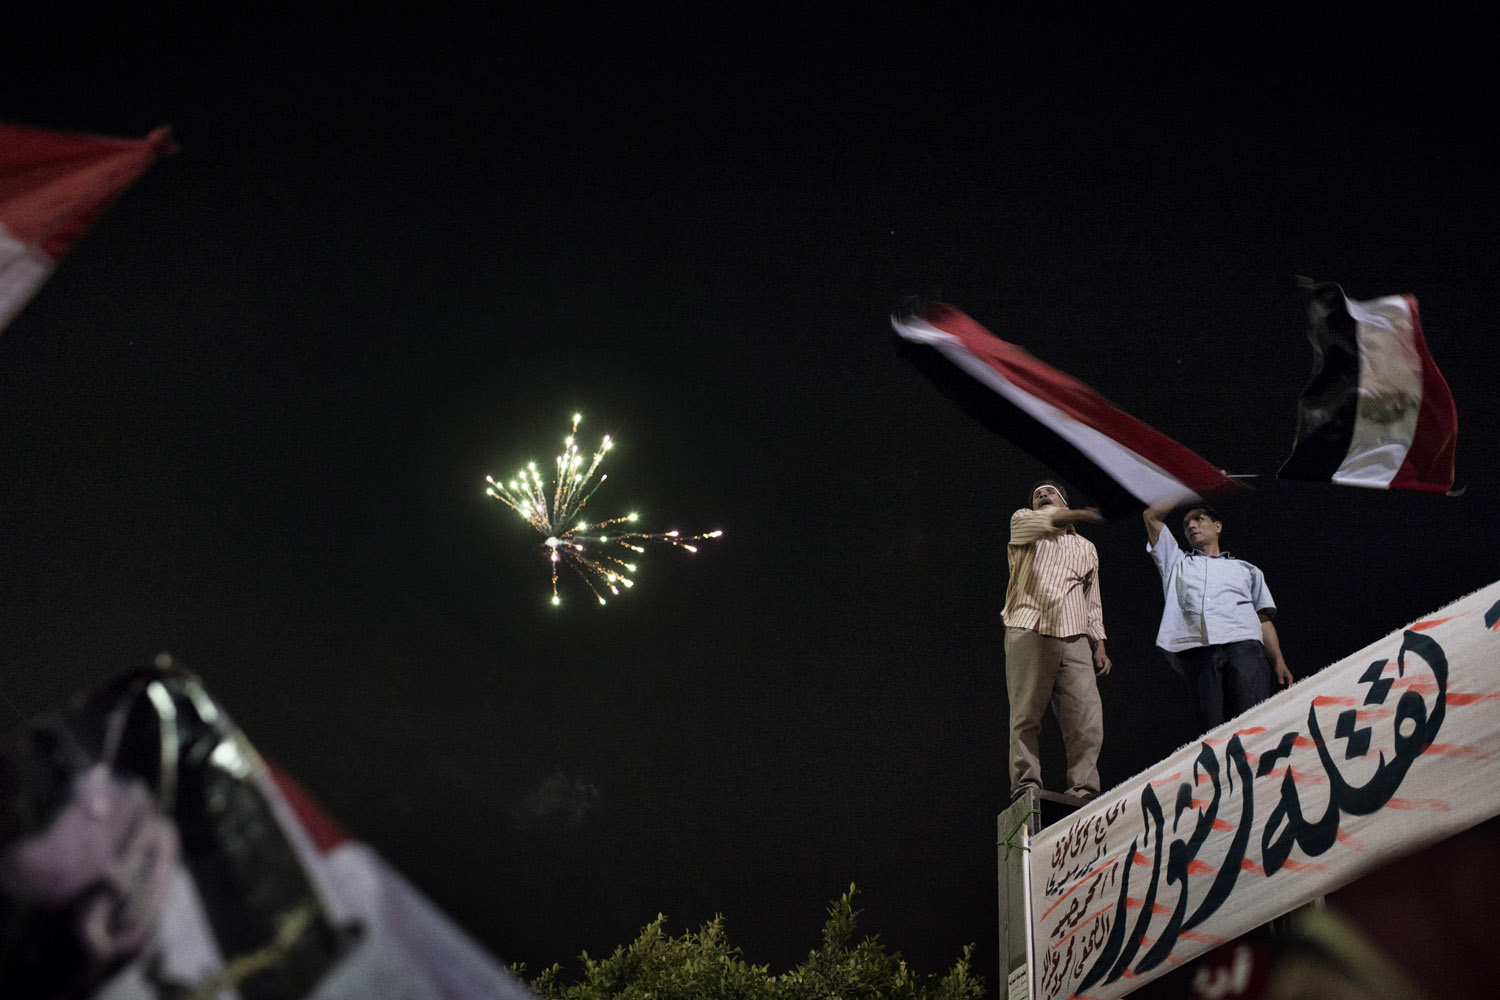 July 7, 2013. Opponents of Egypt's ousted President Mohamed Morsi celebrate and rally in Tahrir Square.